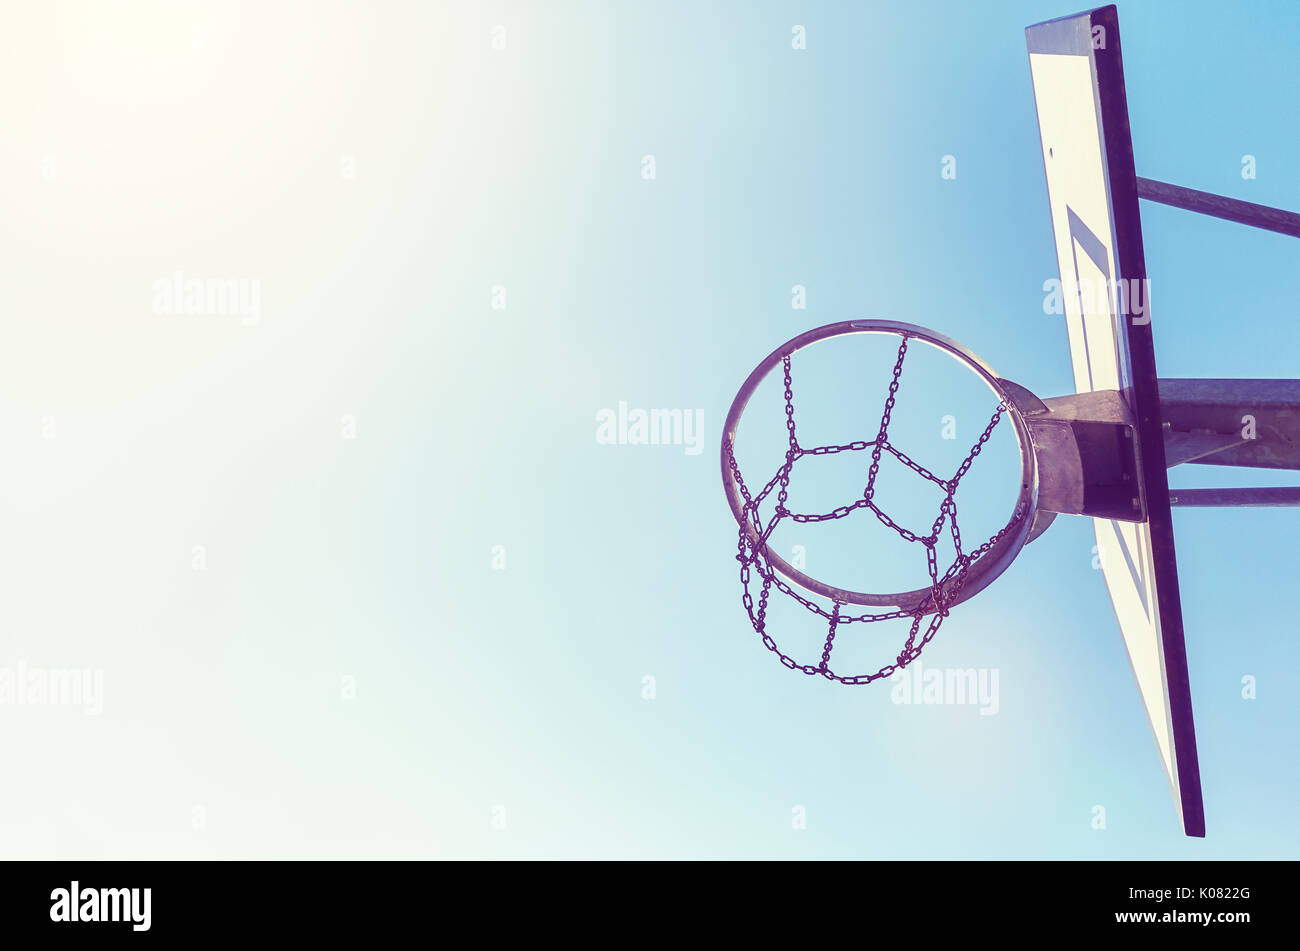 Basketball hoop with chain net at sunset, color toning applied, space for text. Stock Photo